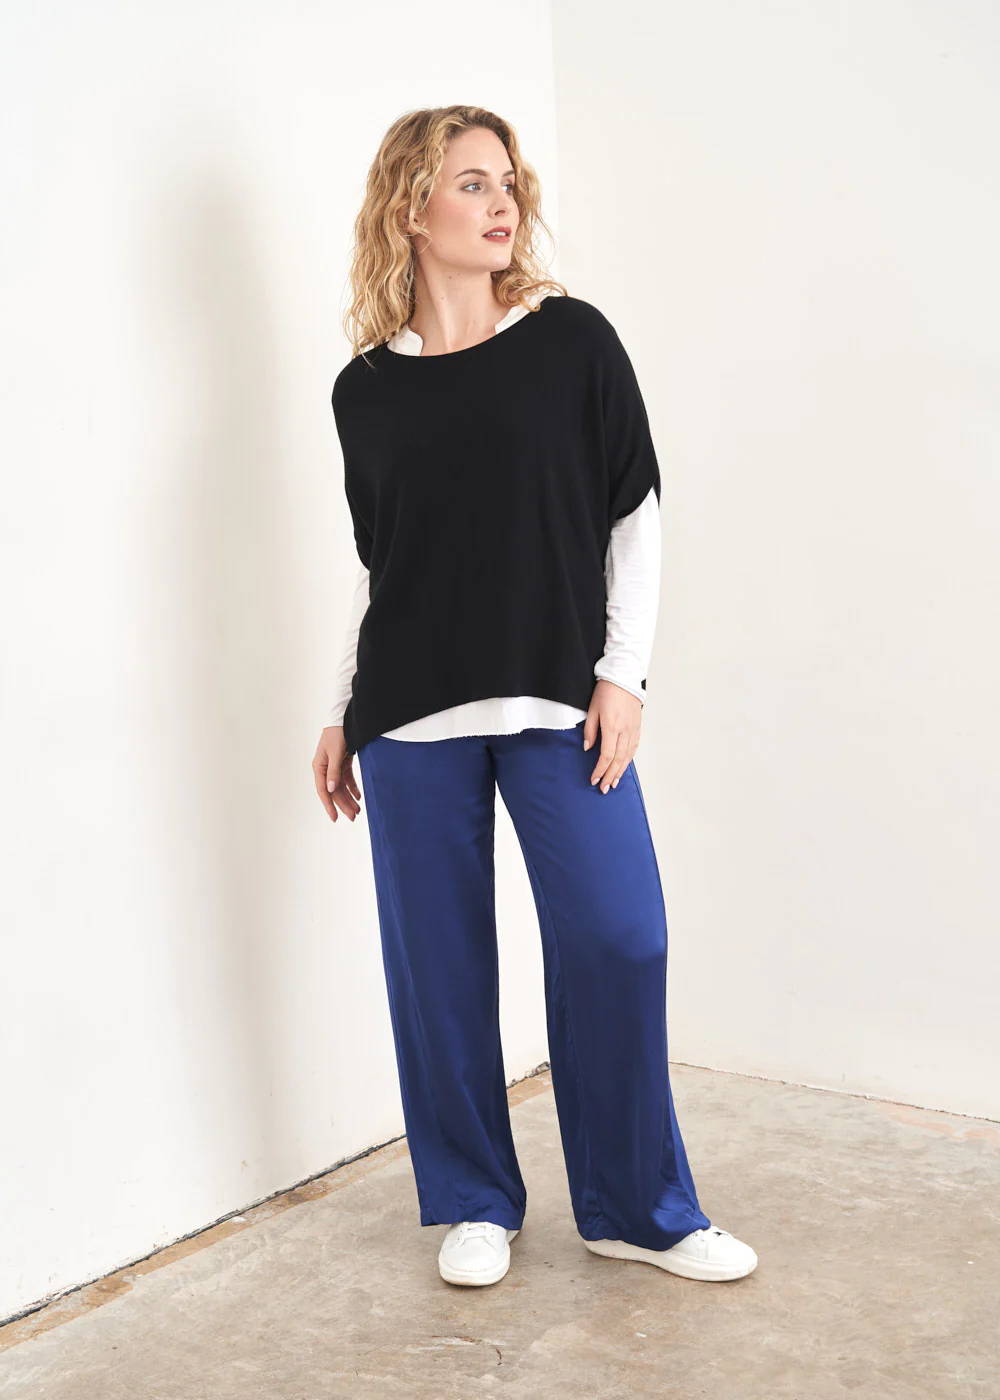 A model wearing a pair of blue wide leg satin trousers with a black sleeveless top over a white long sleeved top